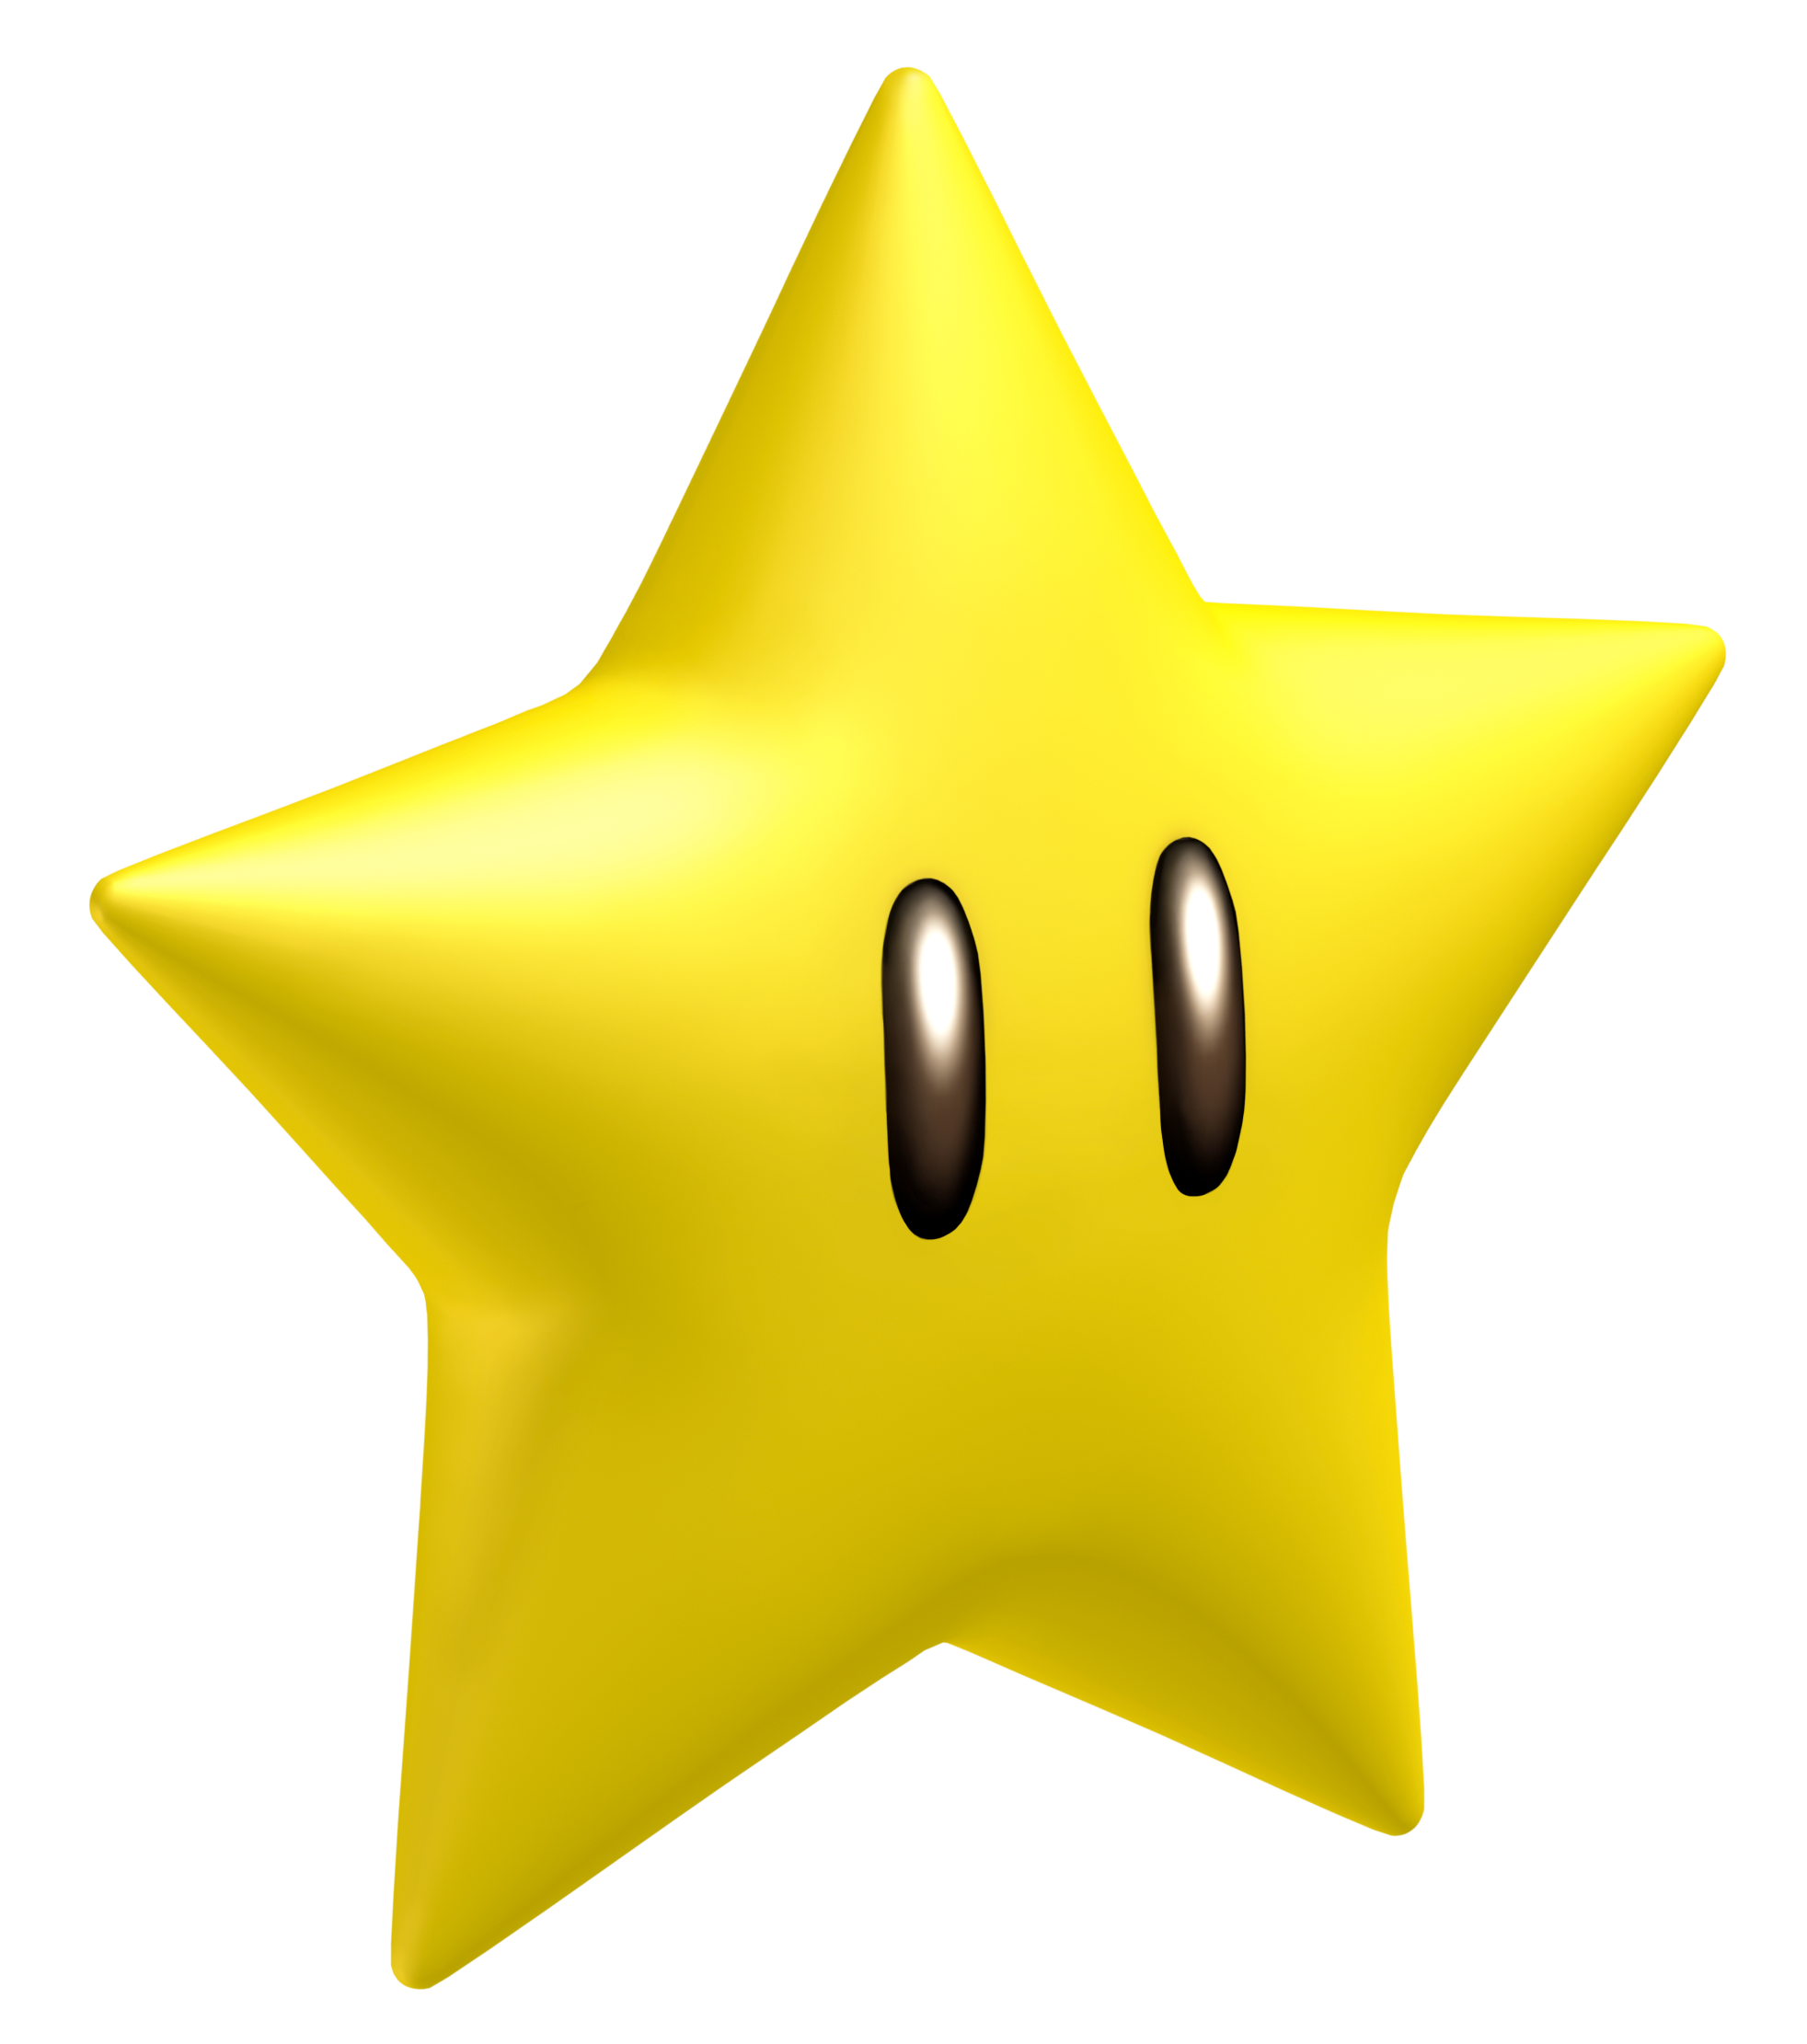 Free 3d Star Images, Download Free Clip Art, Free Clip Art.